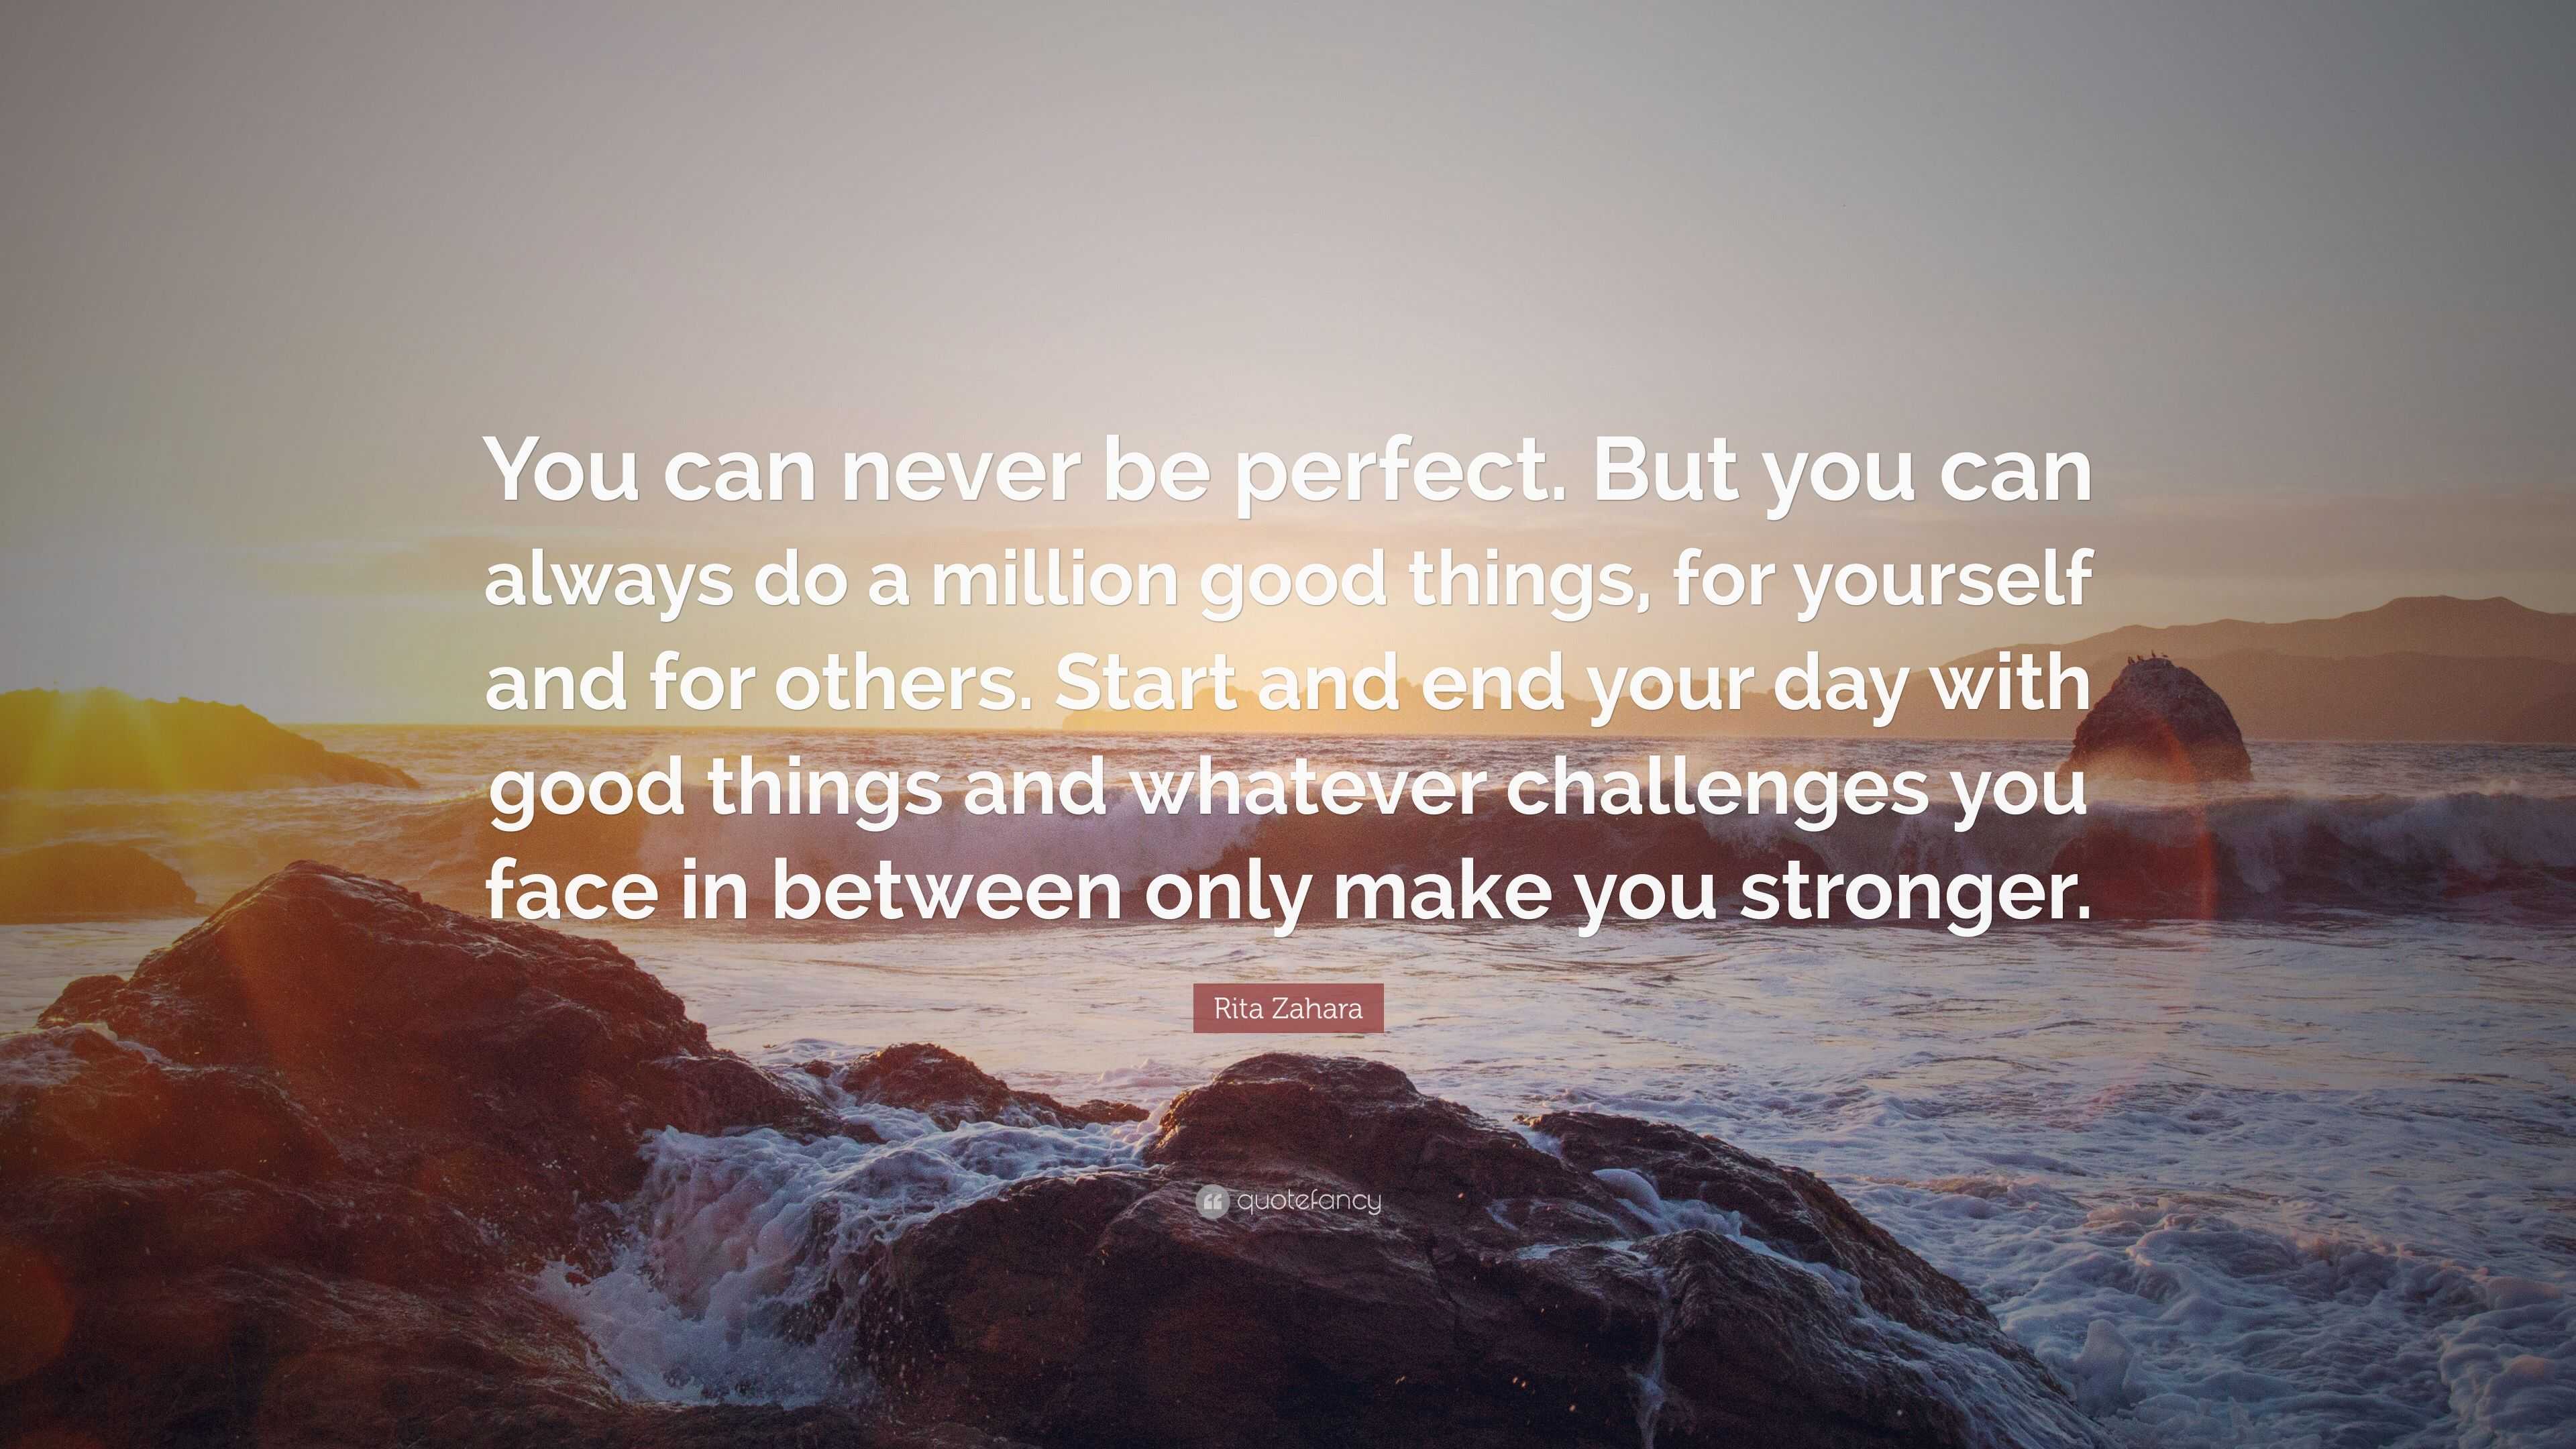 Rita Zahara Quote: “You can never be perfect. But you can always do a ...